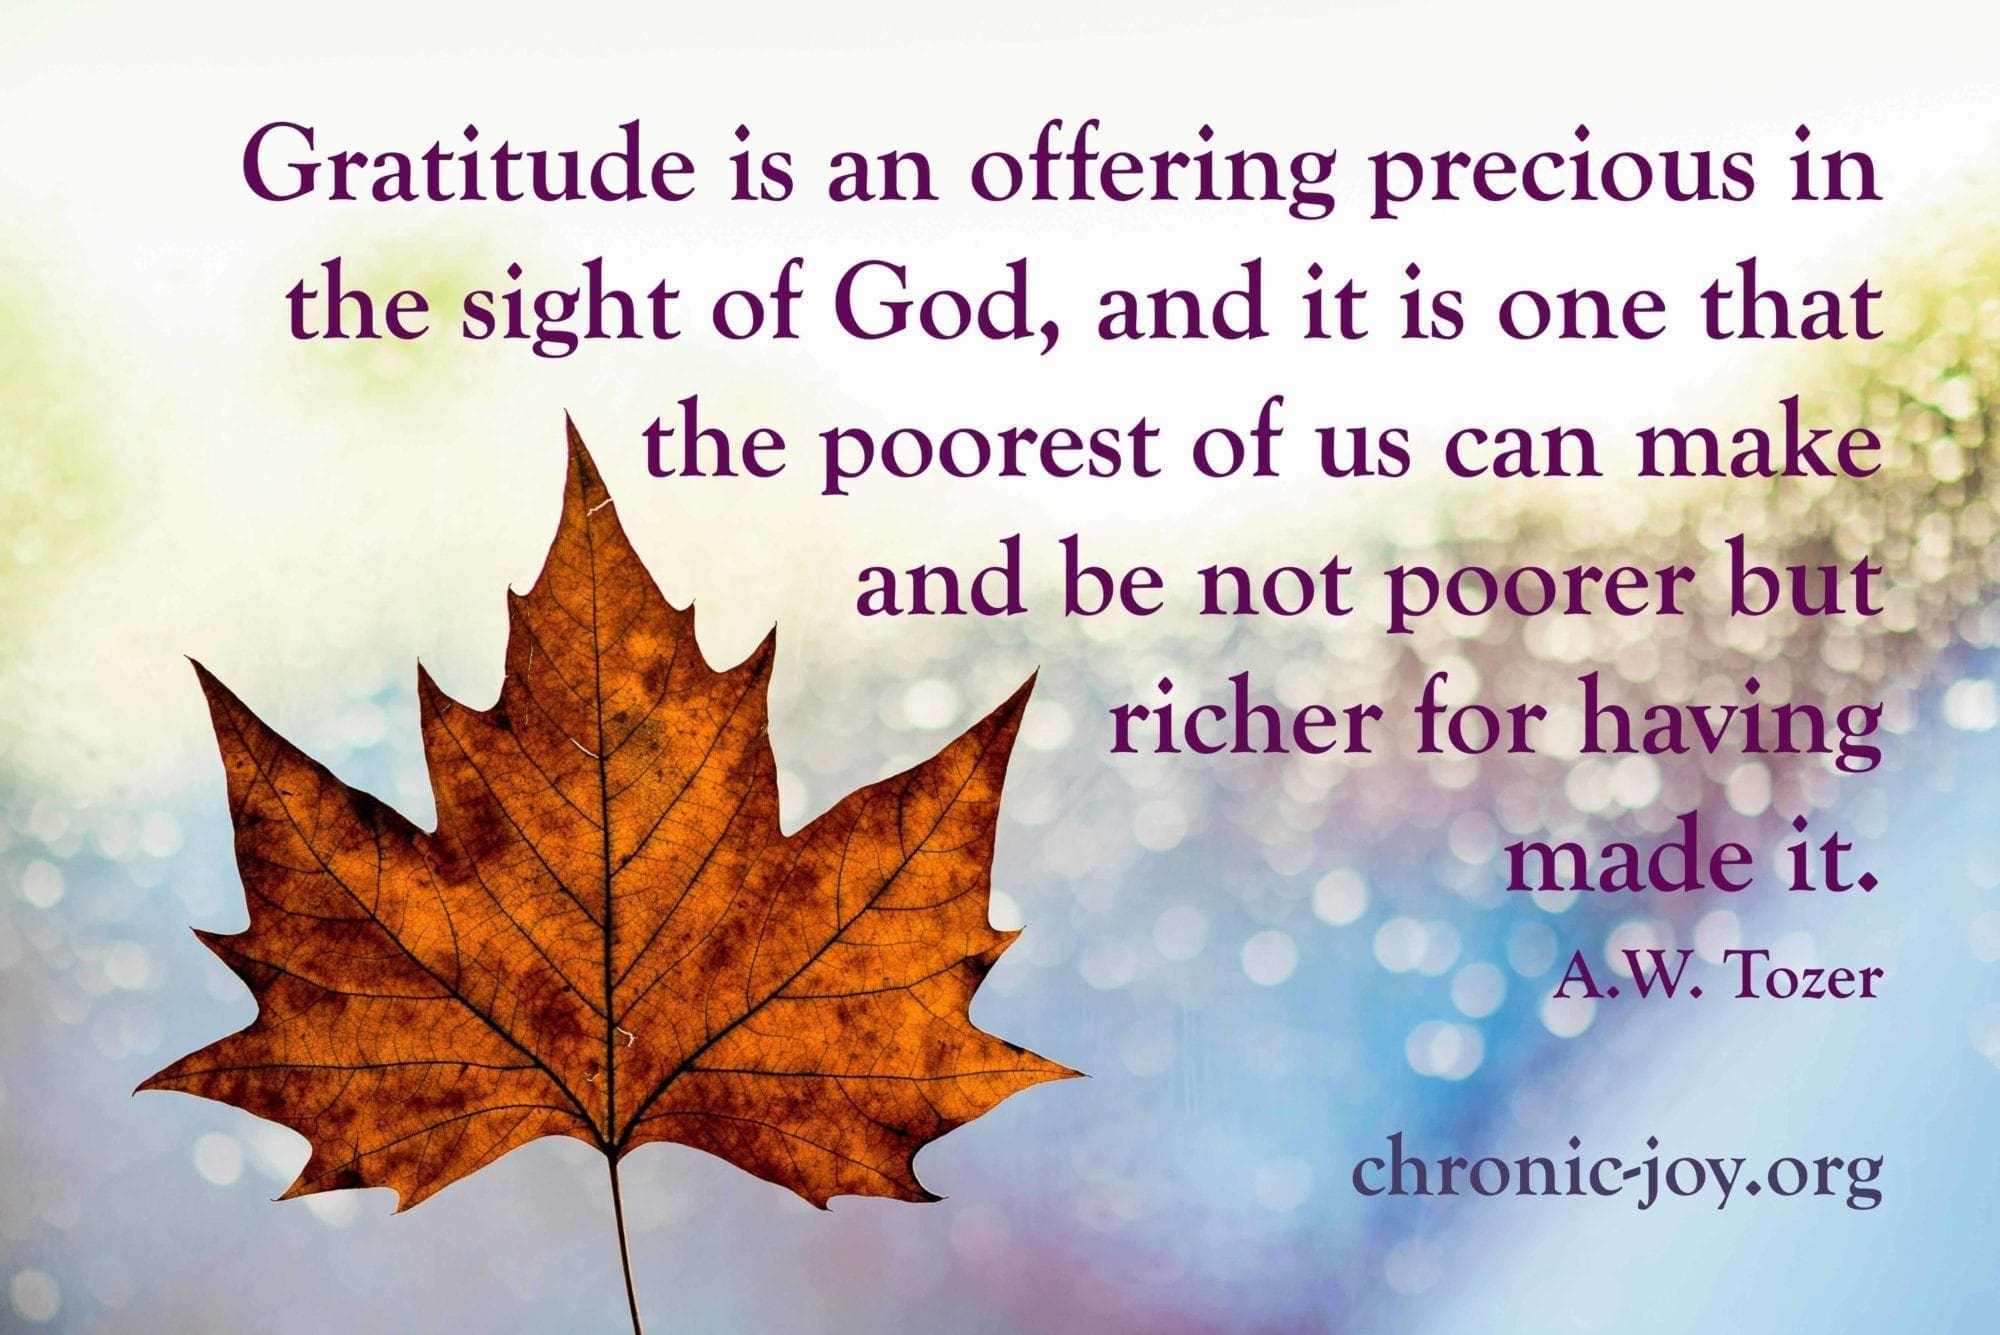 Gratitude is an offering precious in the sight of God, and it is one that the poorest of us can make and be not poorer but richer for having made it.